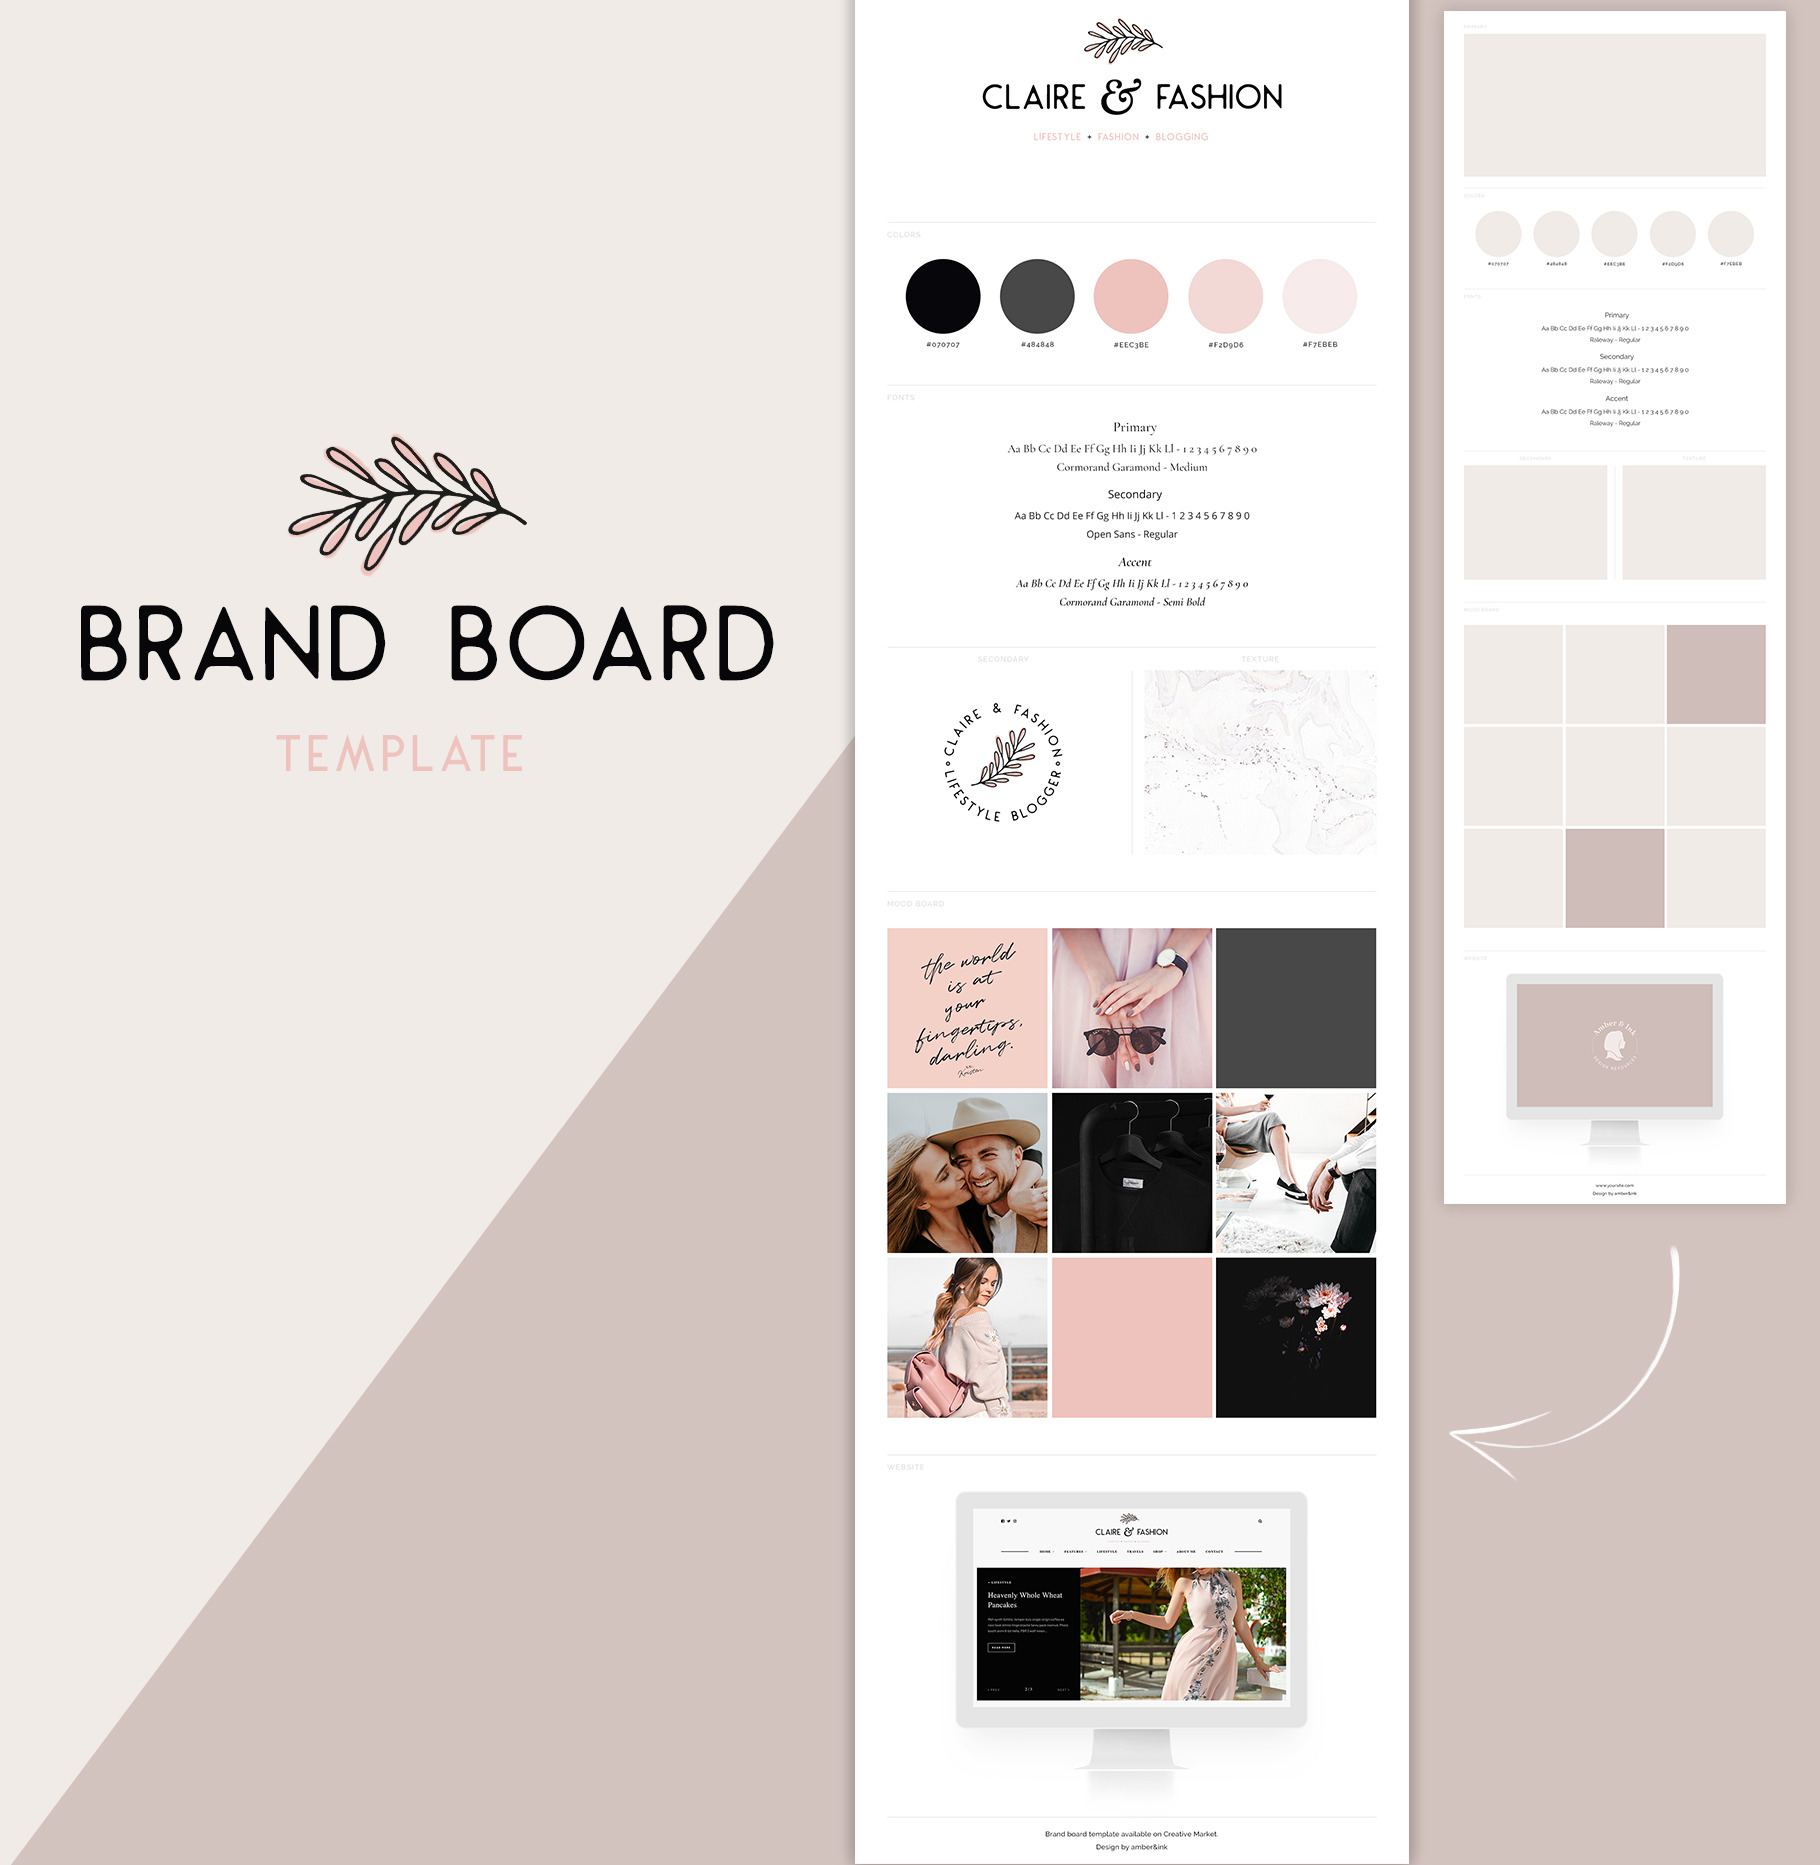 Brand Board Template: Claire&Fashion, a Presentation Template by amber&ink